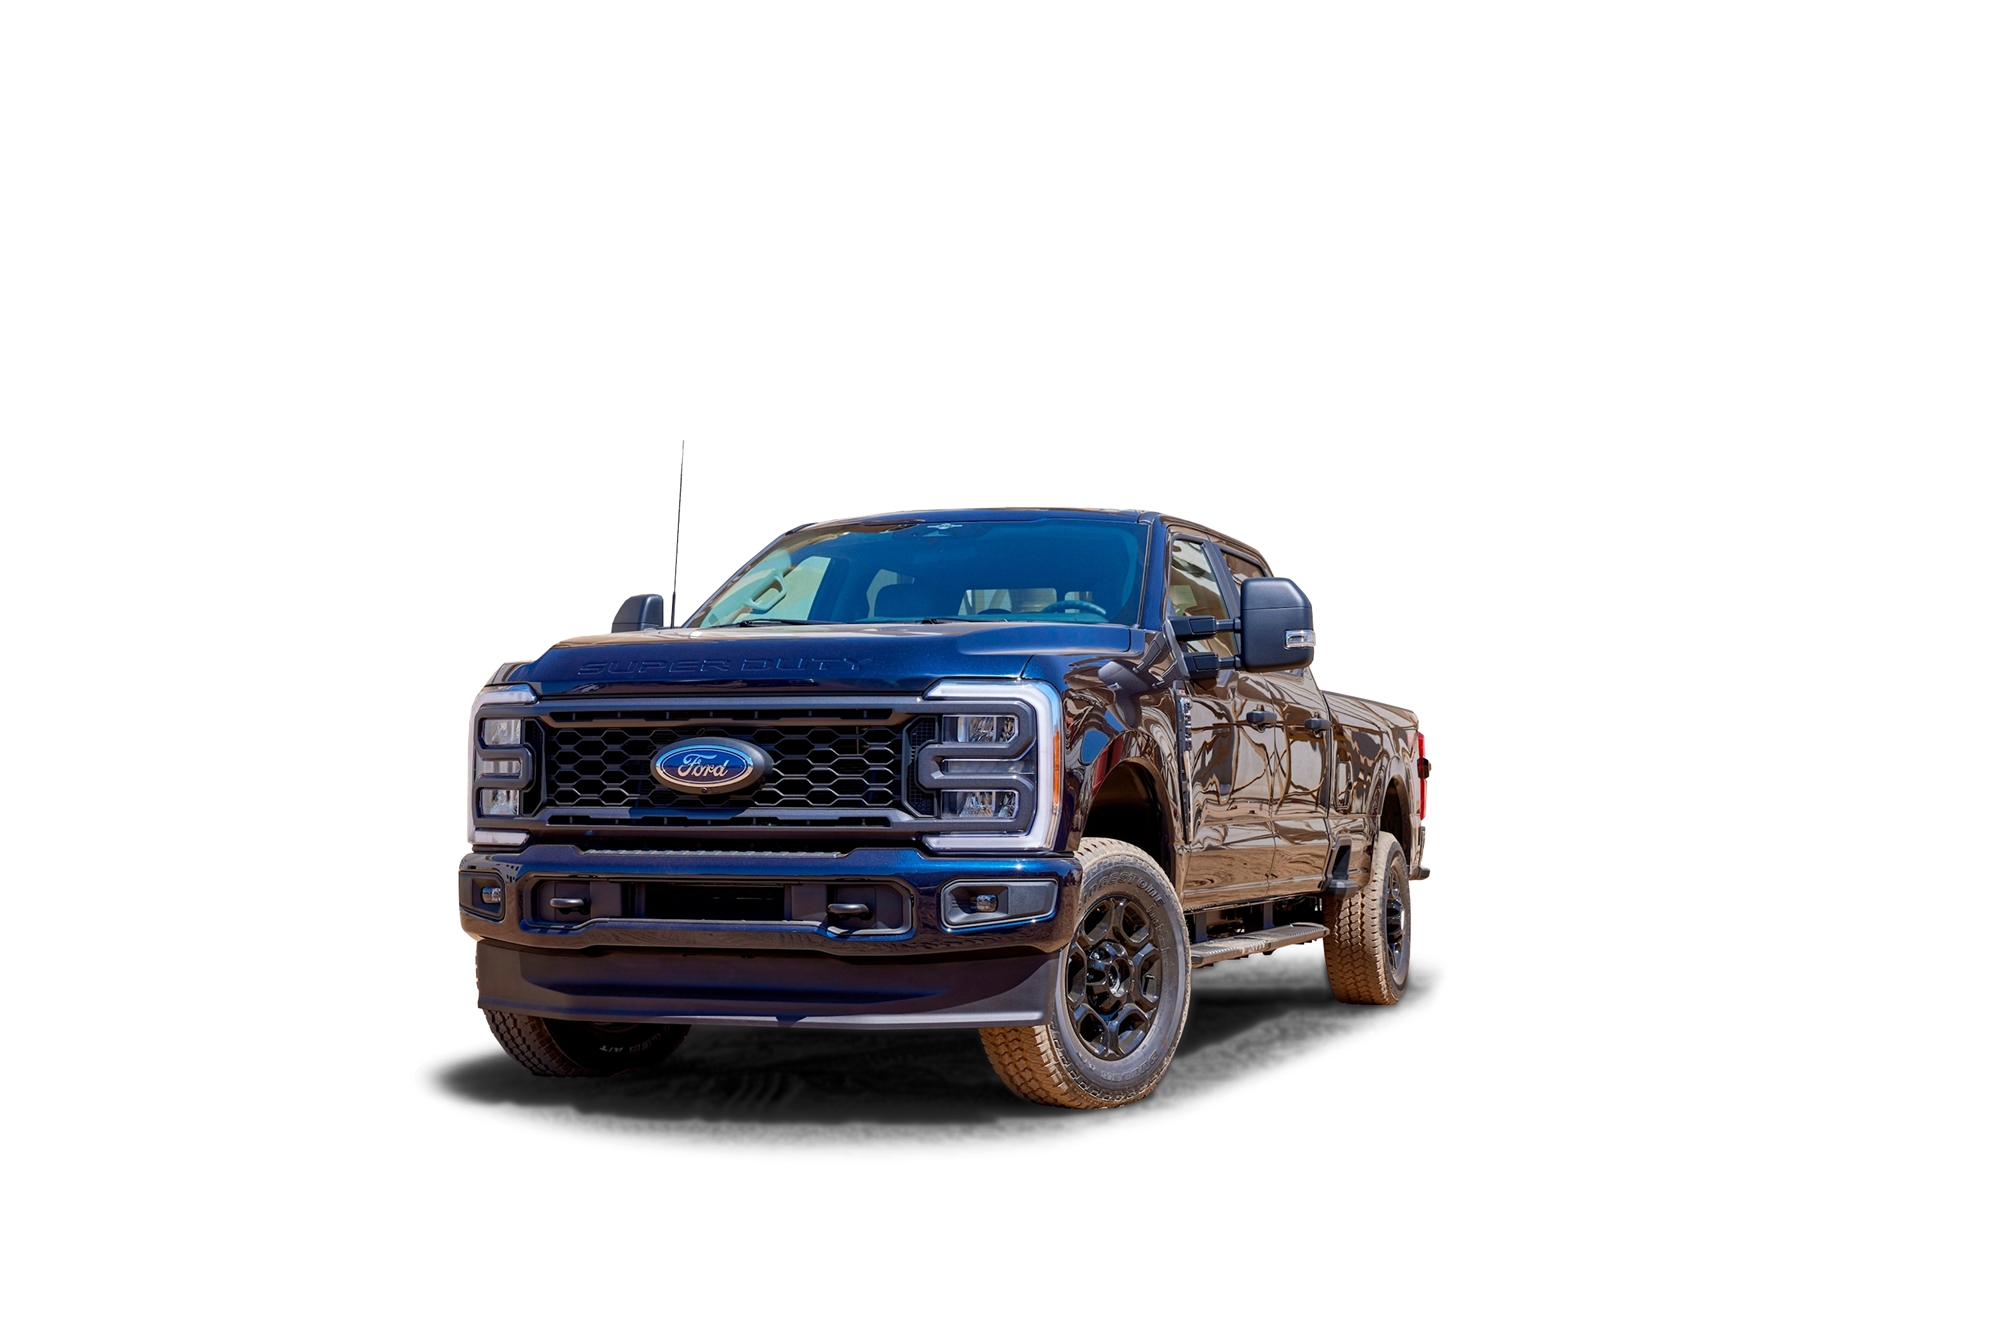 2023 Ford F250 Super Duty Platinum Full Specs, Features and Price